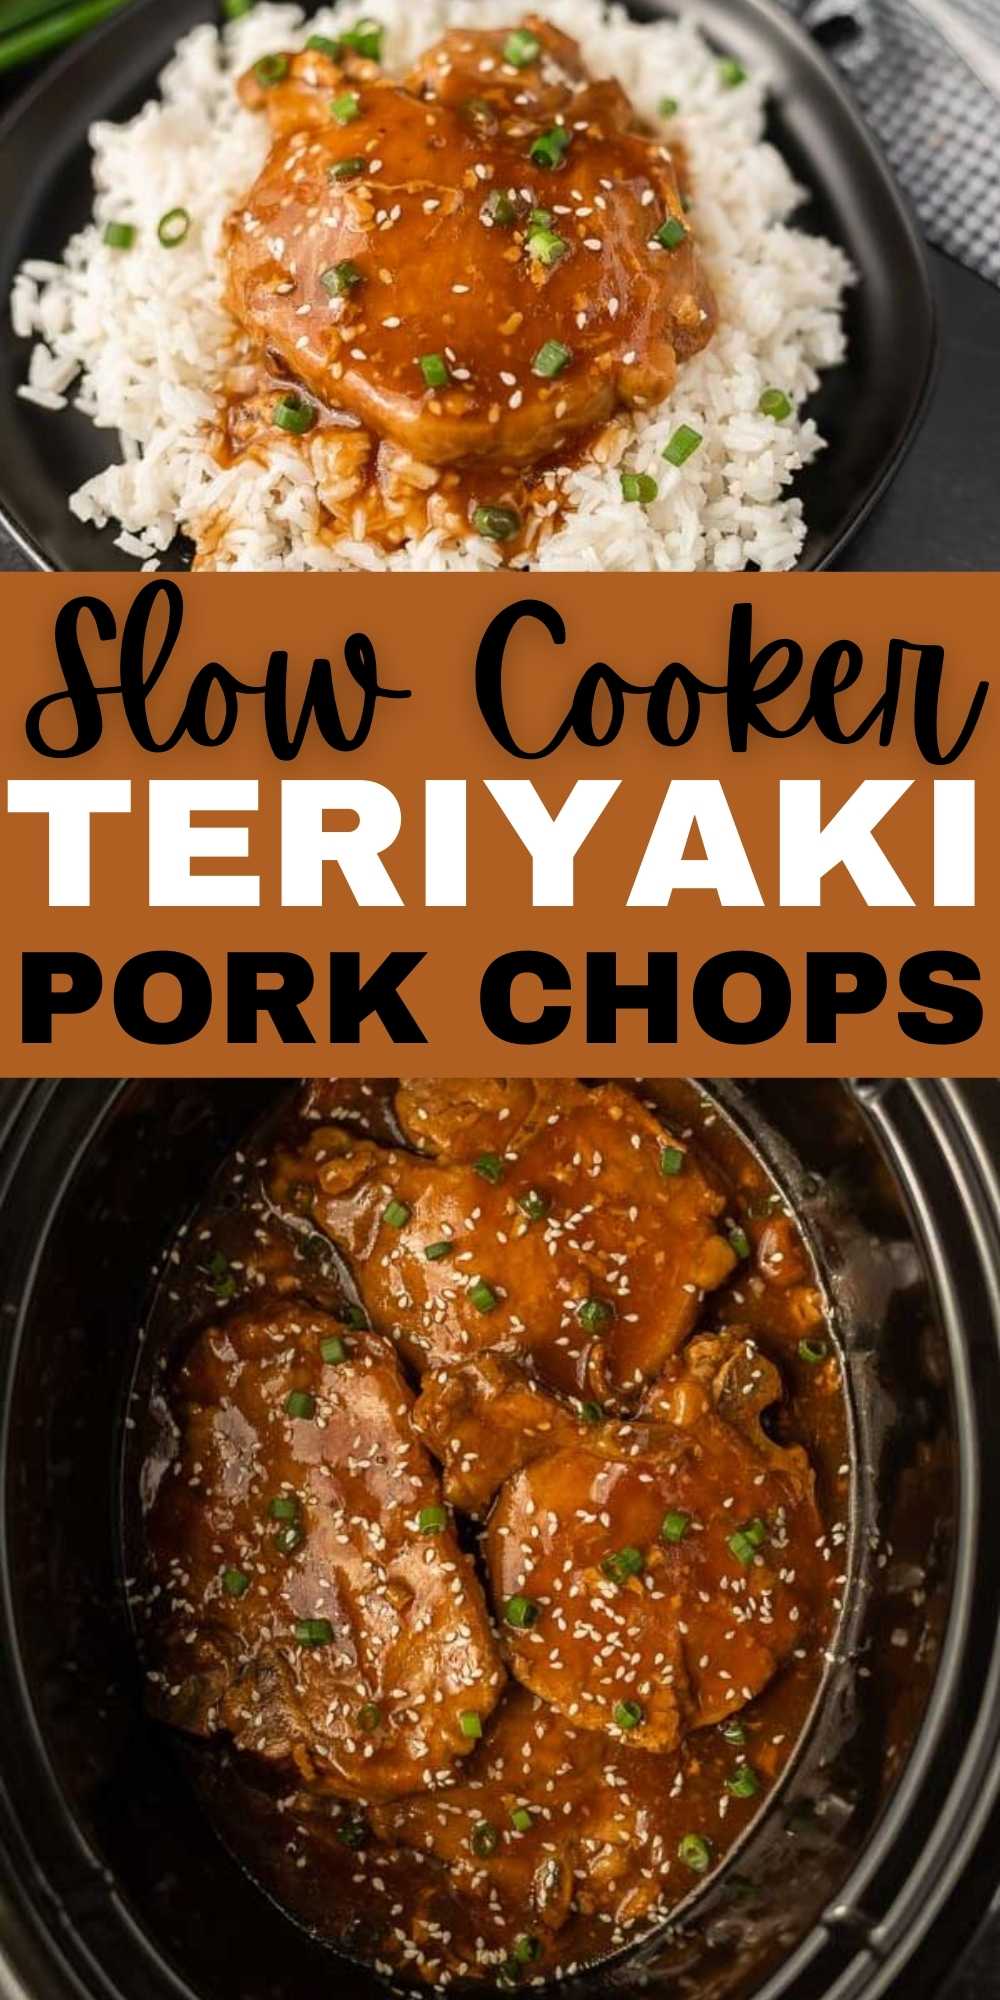 Crockpot teriyaki pork chops recipe is simple and delicious! Teriyaki pork chops with pineapple make an amazing meal. It is a family favorite. You are going to live this easy 5 ingredient crock pot recipe.  #eatingonadime #crockpotrecipes #slowcookerrecipes #porkrecipes 
